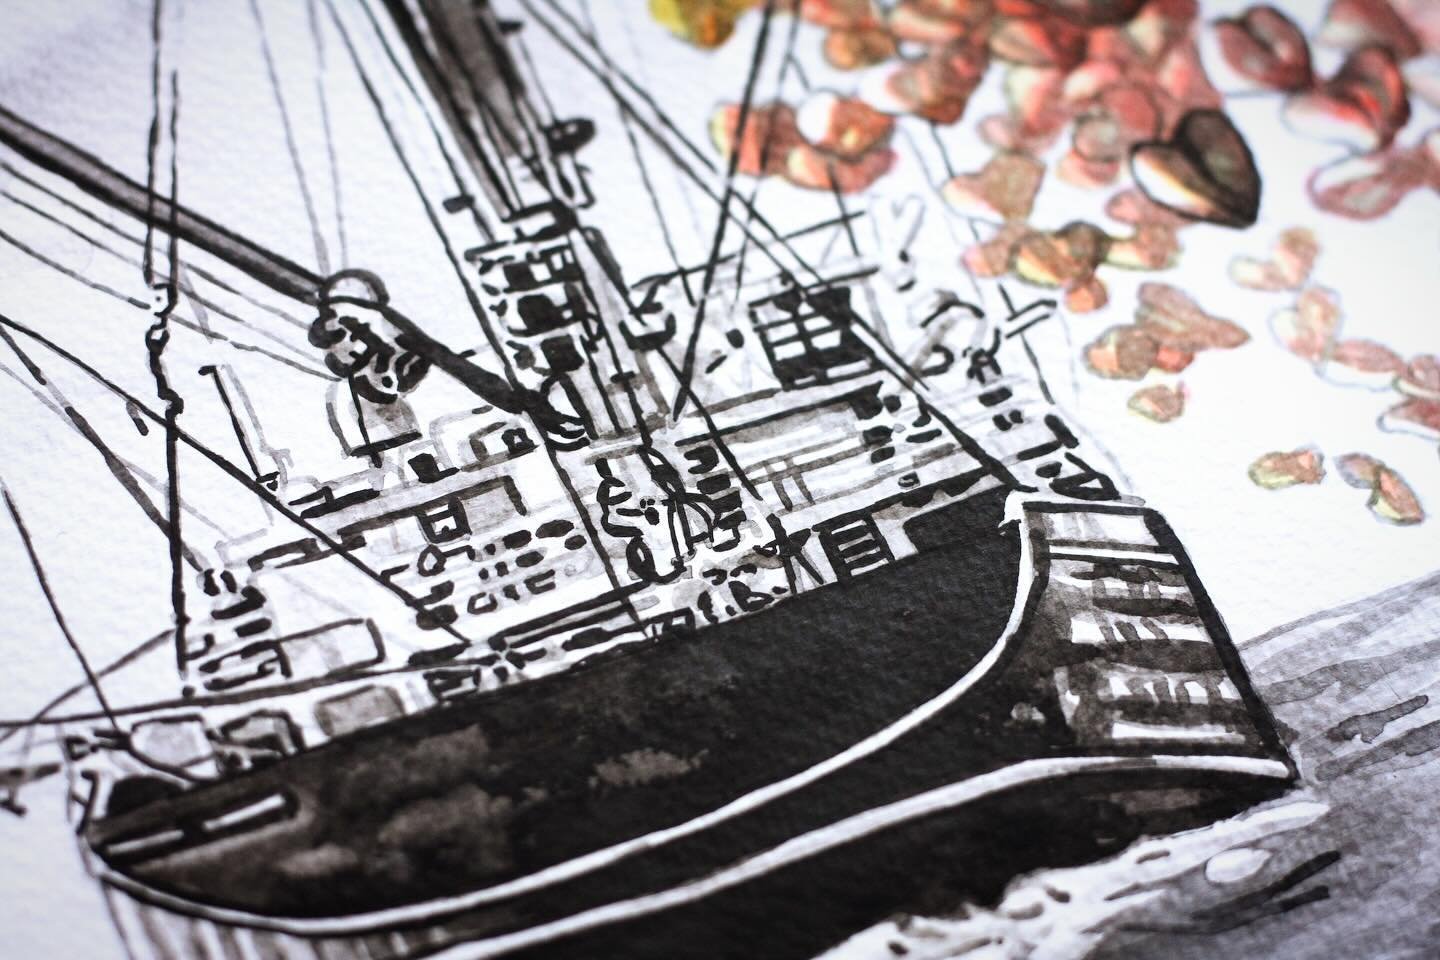 Oh, ship! 

Within my Ocean Noir series, I wanted to use a traditionally destructive sea vessel and turn it into something fun and magical. So here&rsquo;s a bottom trawler vessel releasing hearts into the sky! 

Let&rsquo;s show a little love to pla